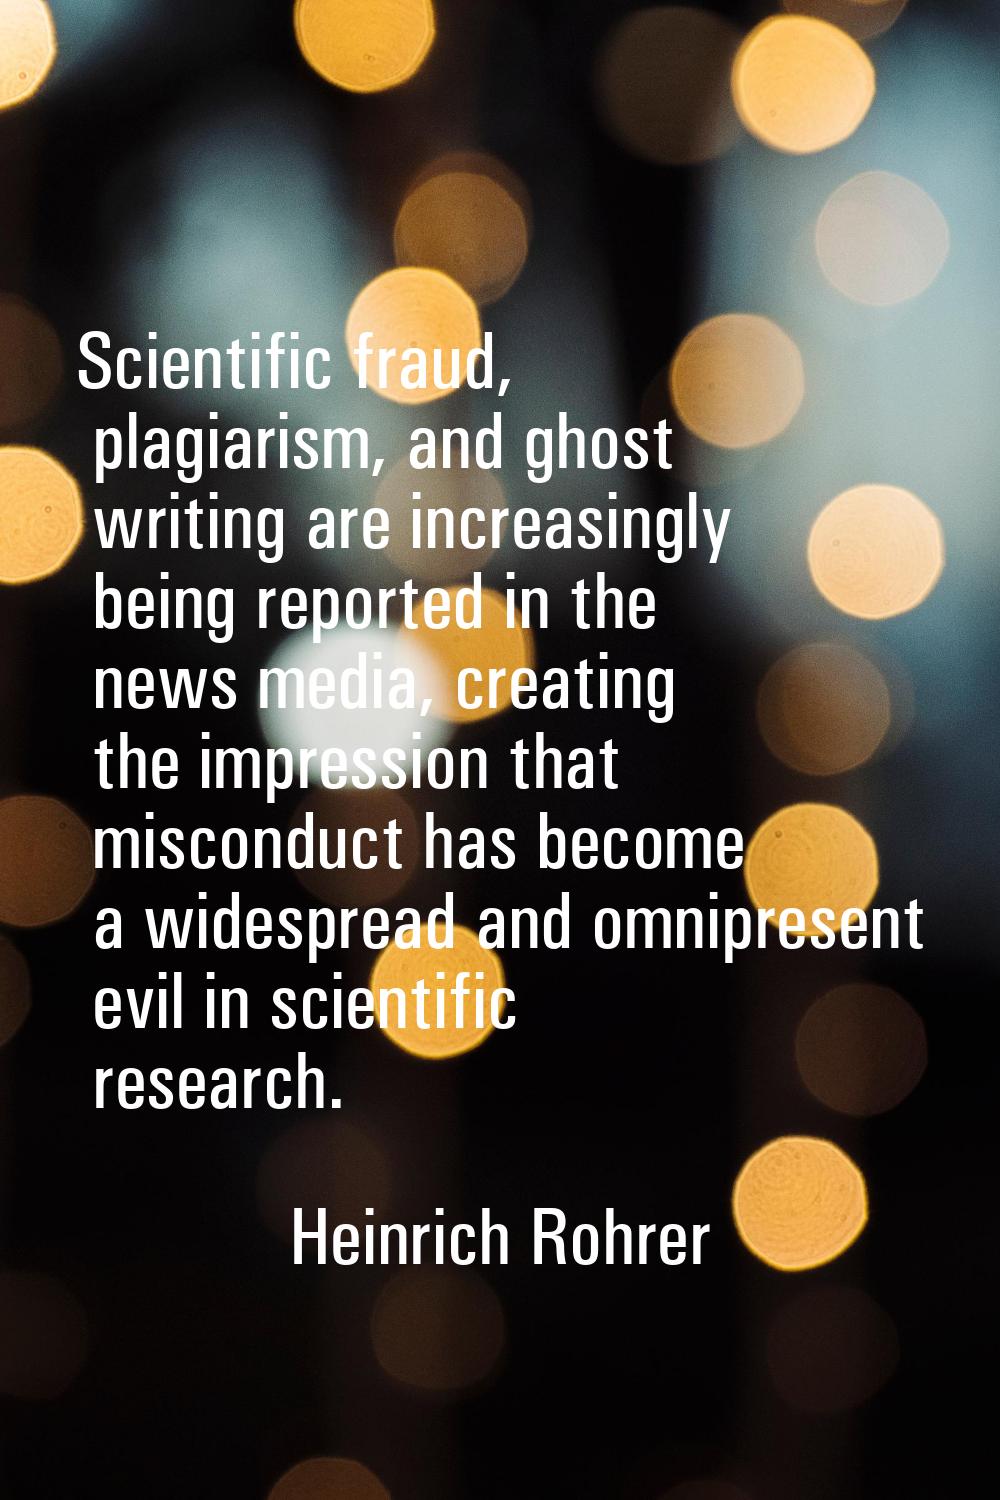 Scientific fraud, plagiarism, and ghost writing are increasingly being reported in the news media, 